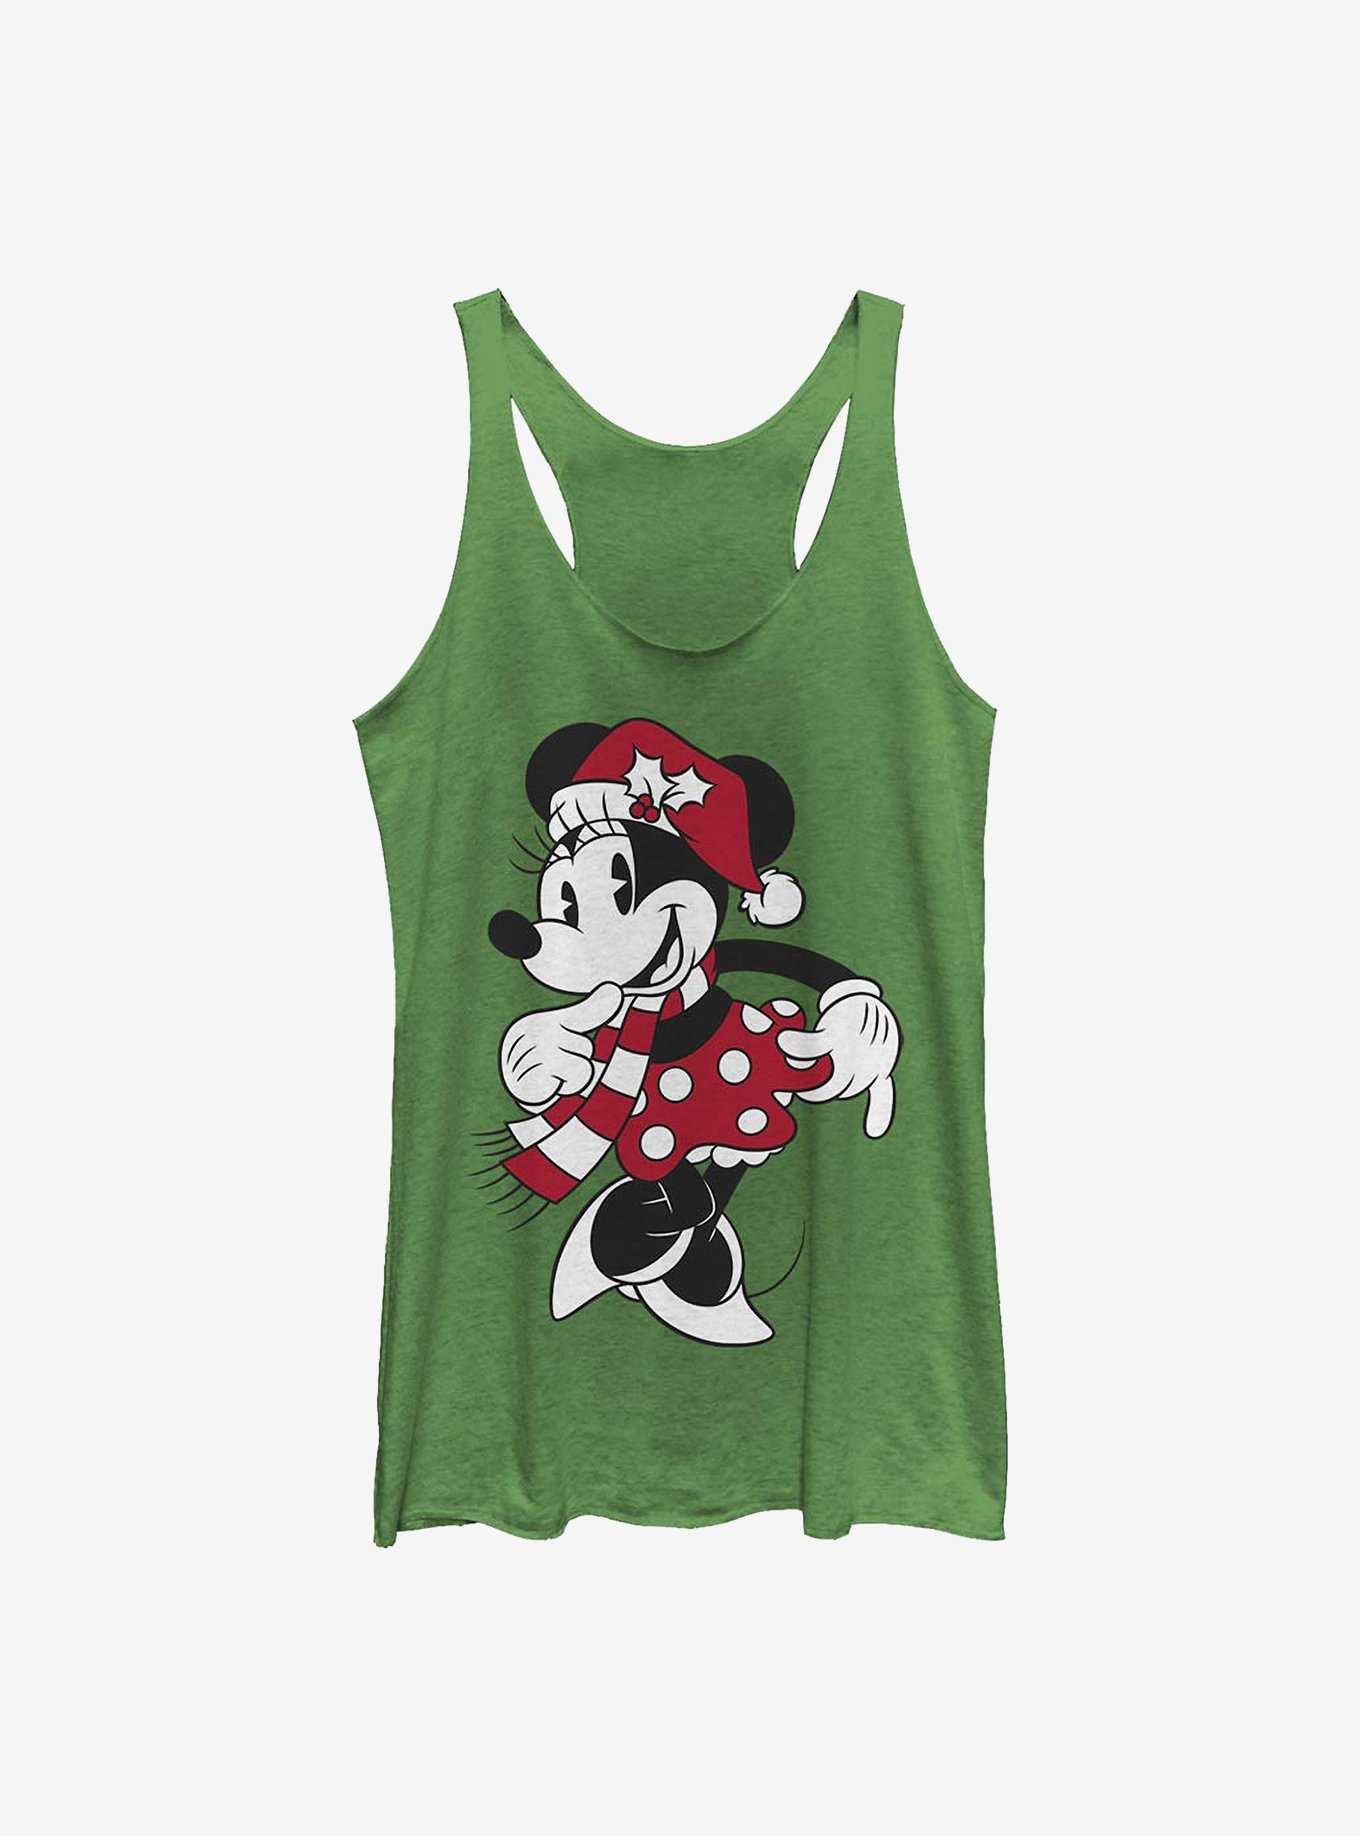 Hot Topic Disney Minnie Mouse Prost Girls Tank